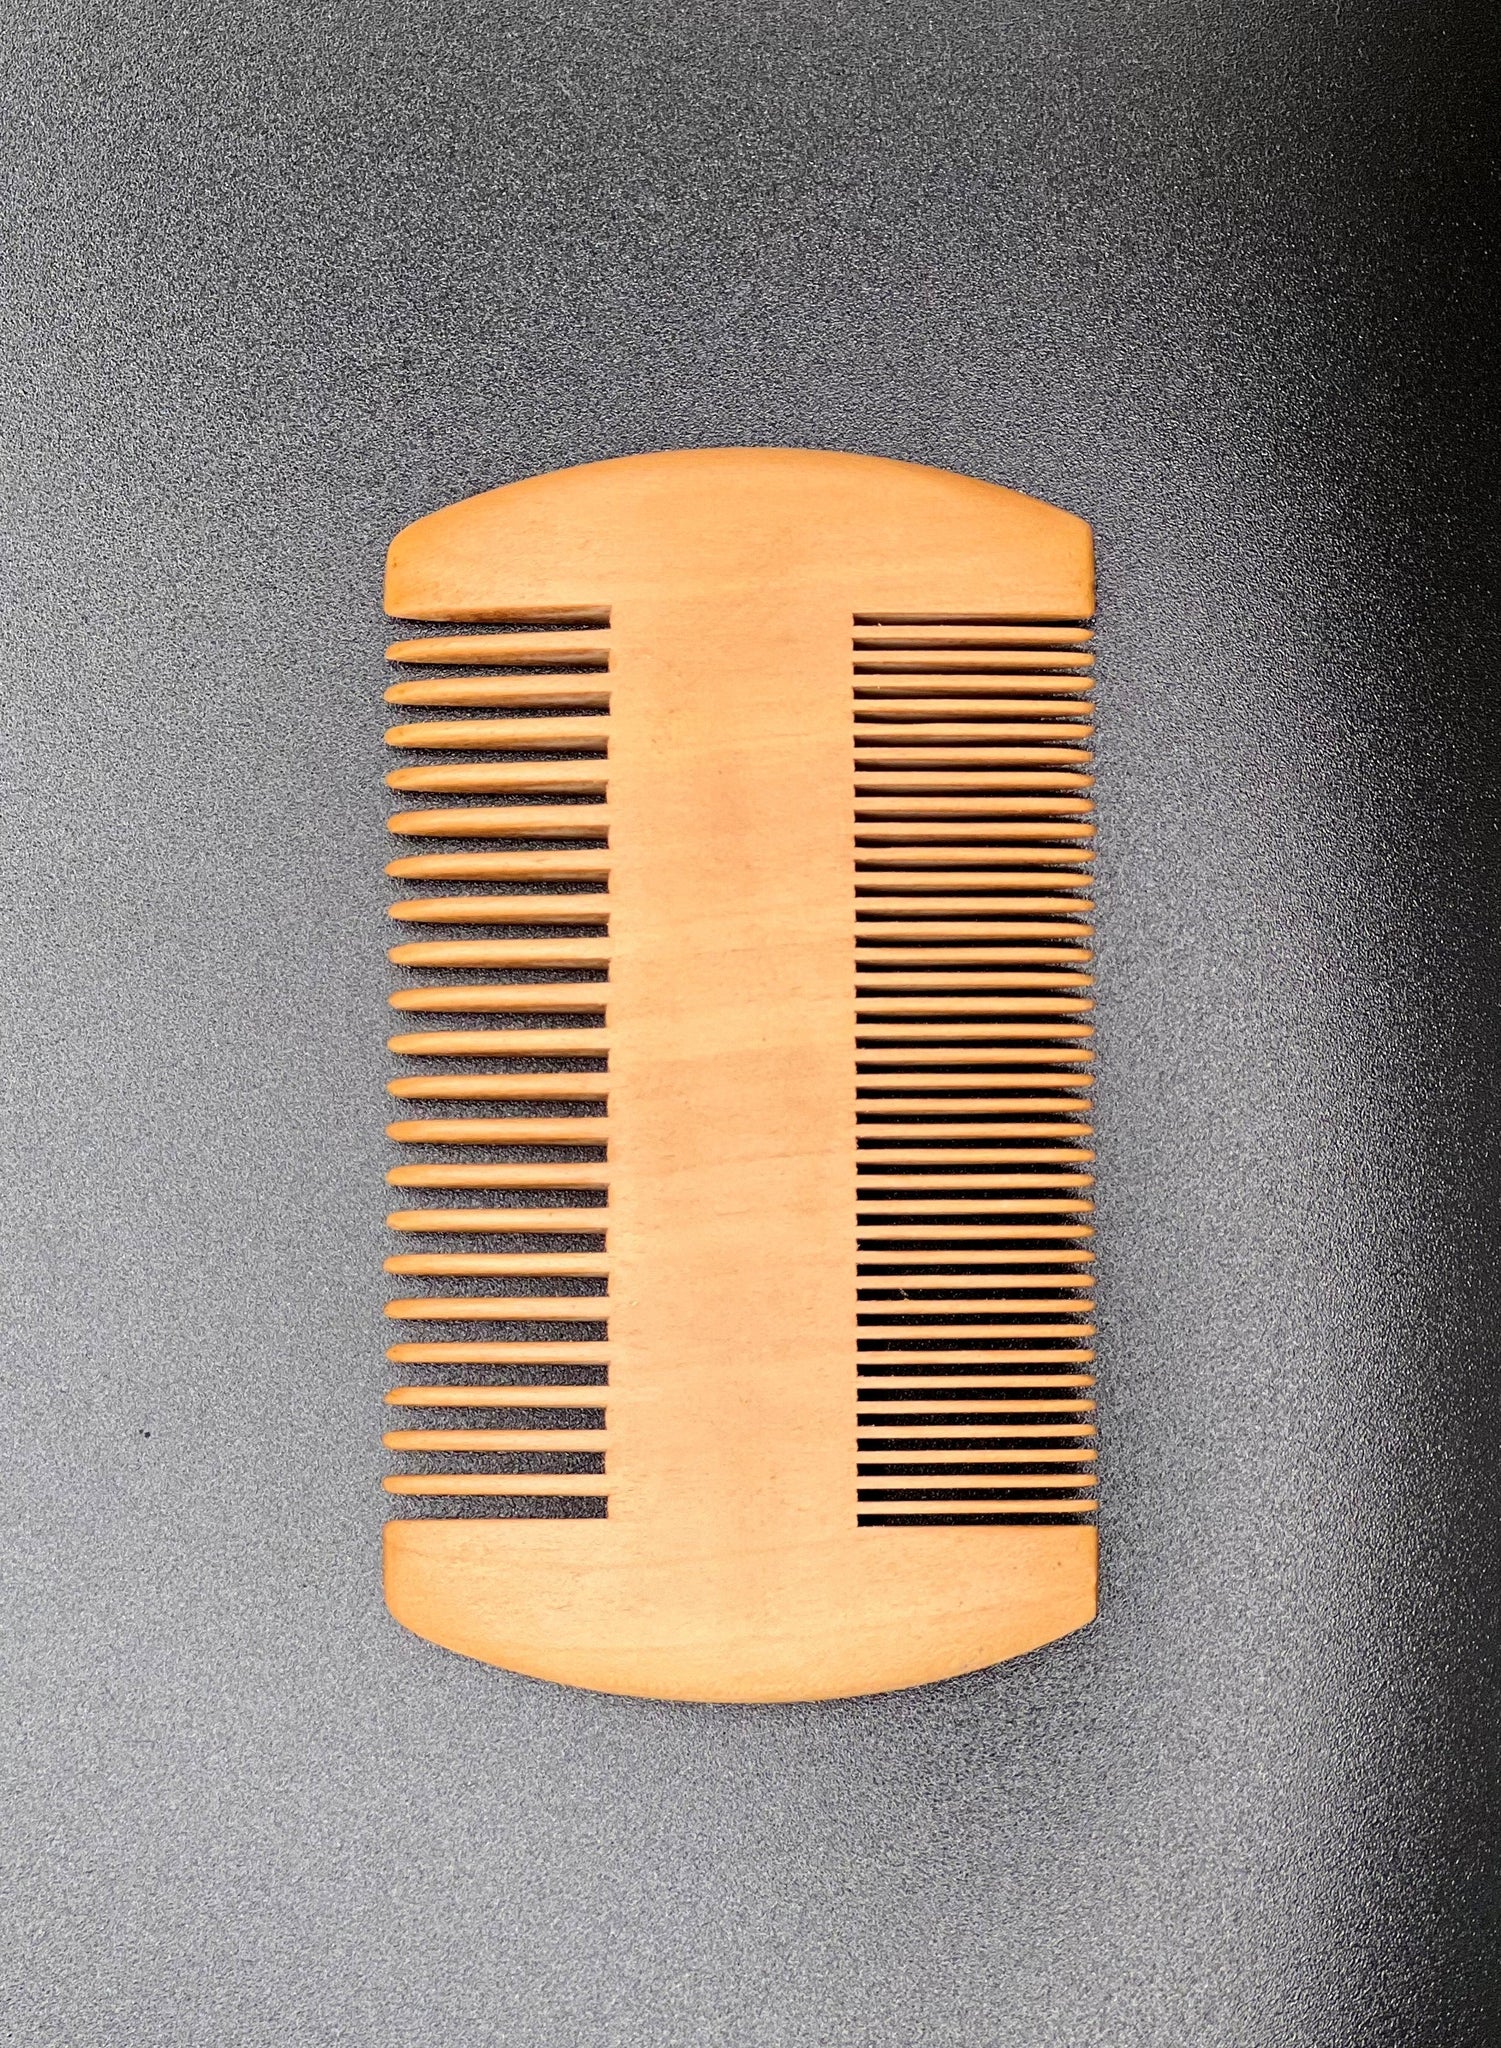 Pack of 20 Engraved Beechwood Double Toothed Beard Comb ($5.20 each)